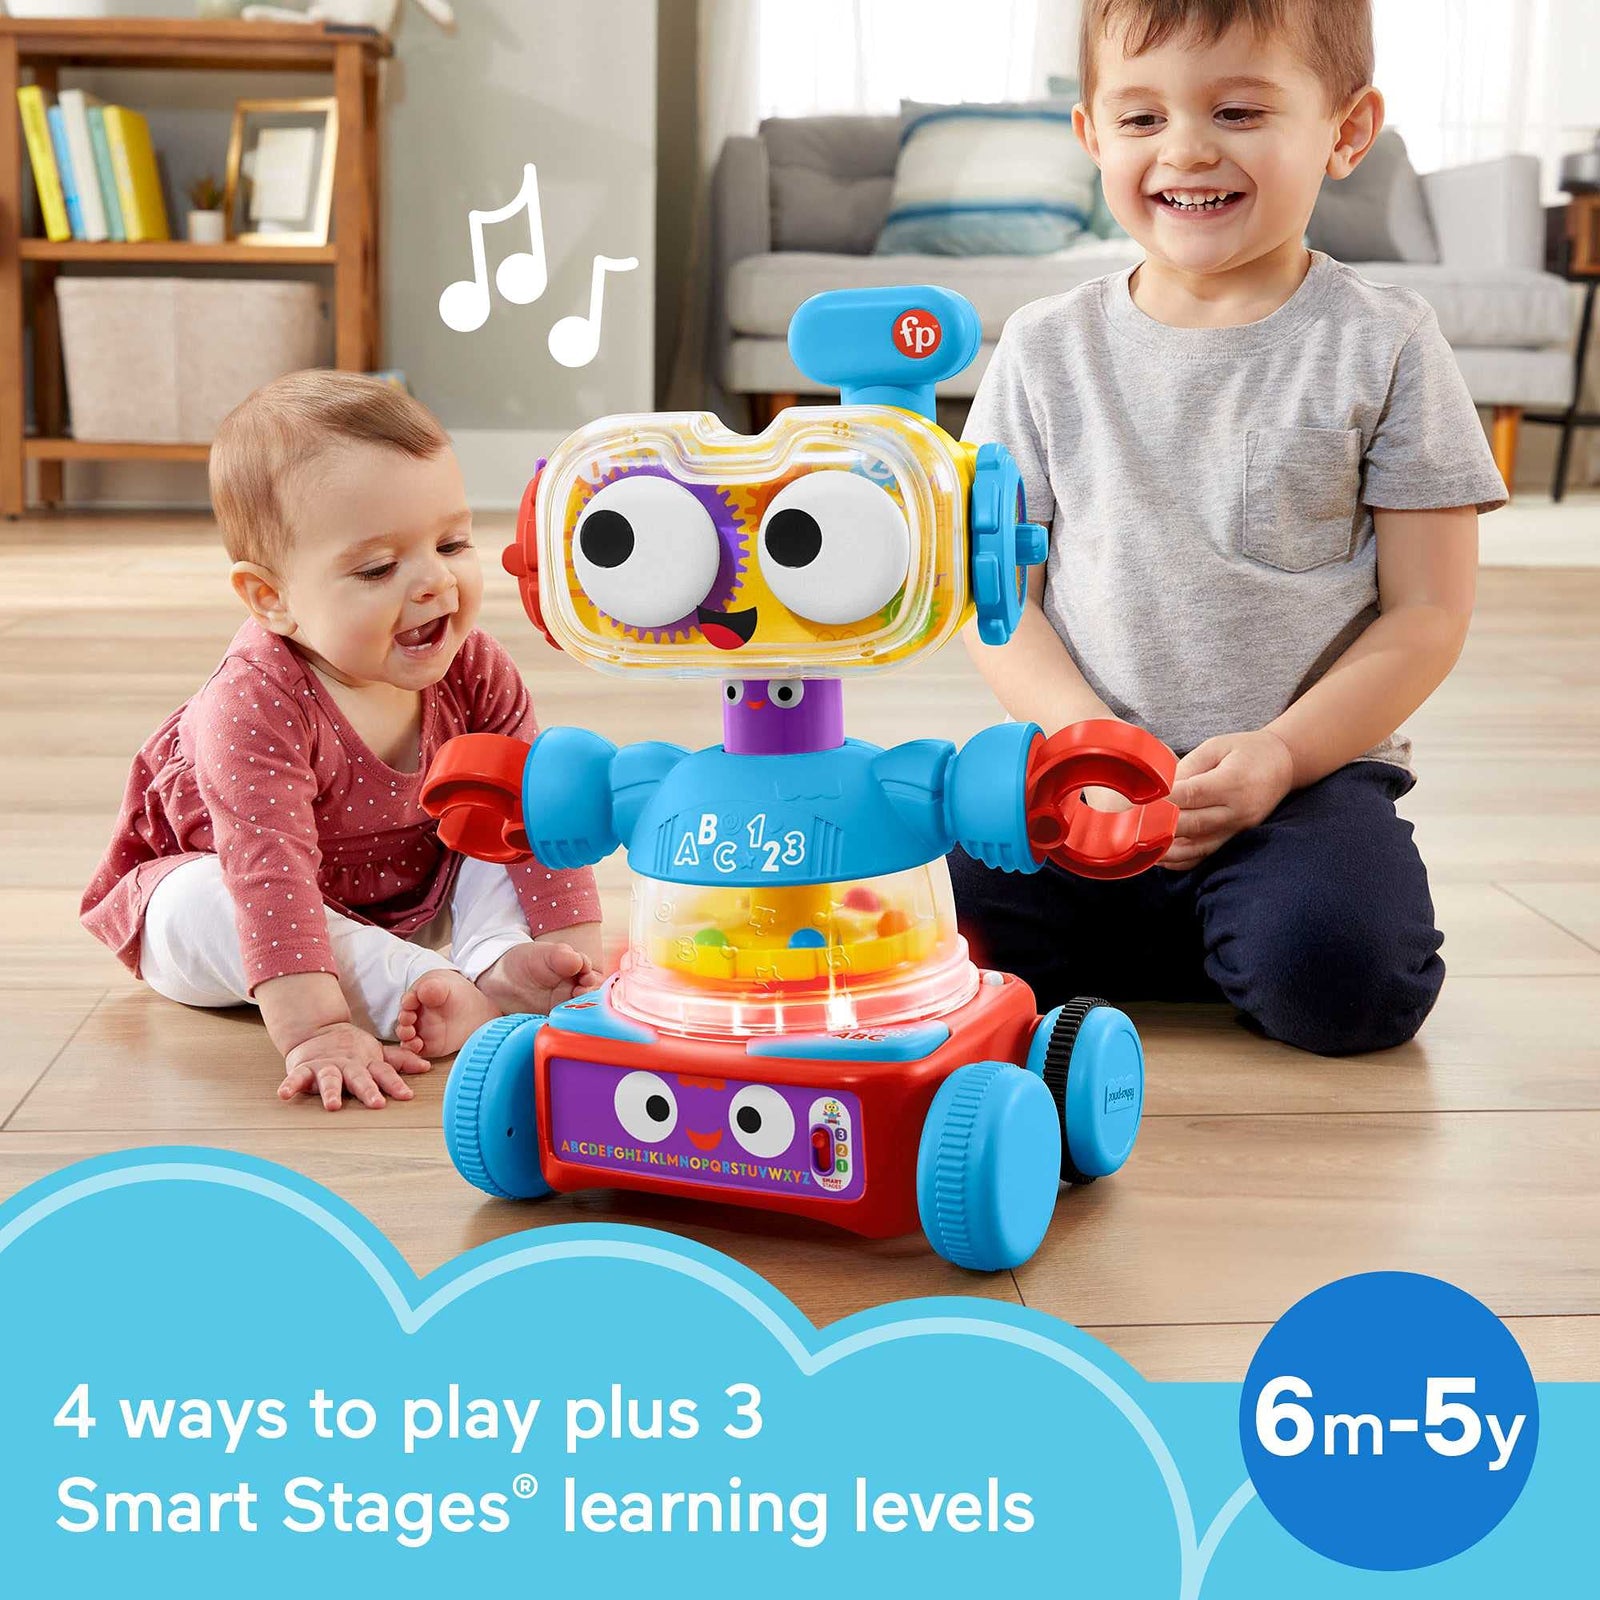 Fisher-Price 4-in-1 Ultimate Learning Bot, Electronic Activity Toy with Lights, Music and Educational Content for Infants and Kids 6 Months to 5 Years